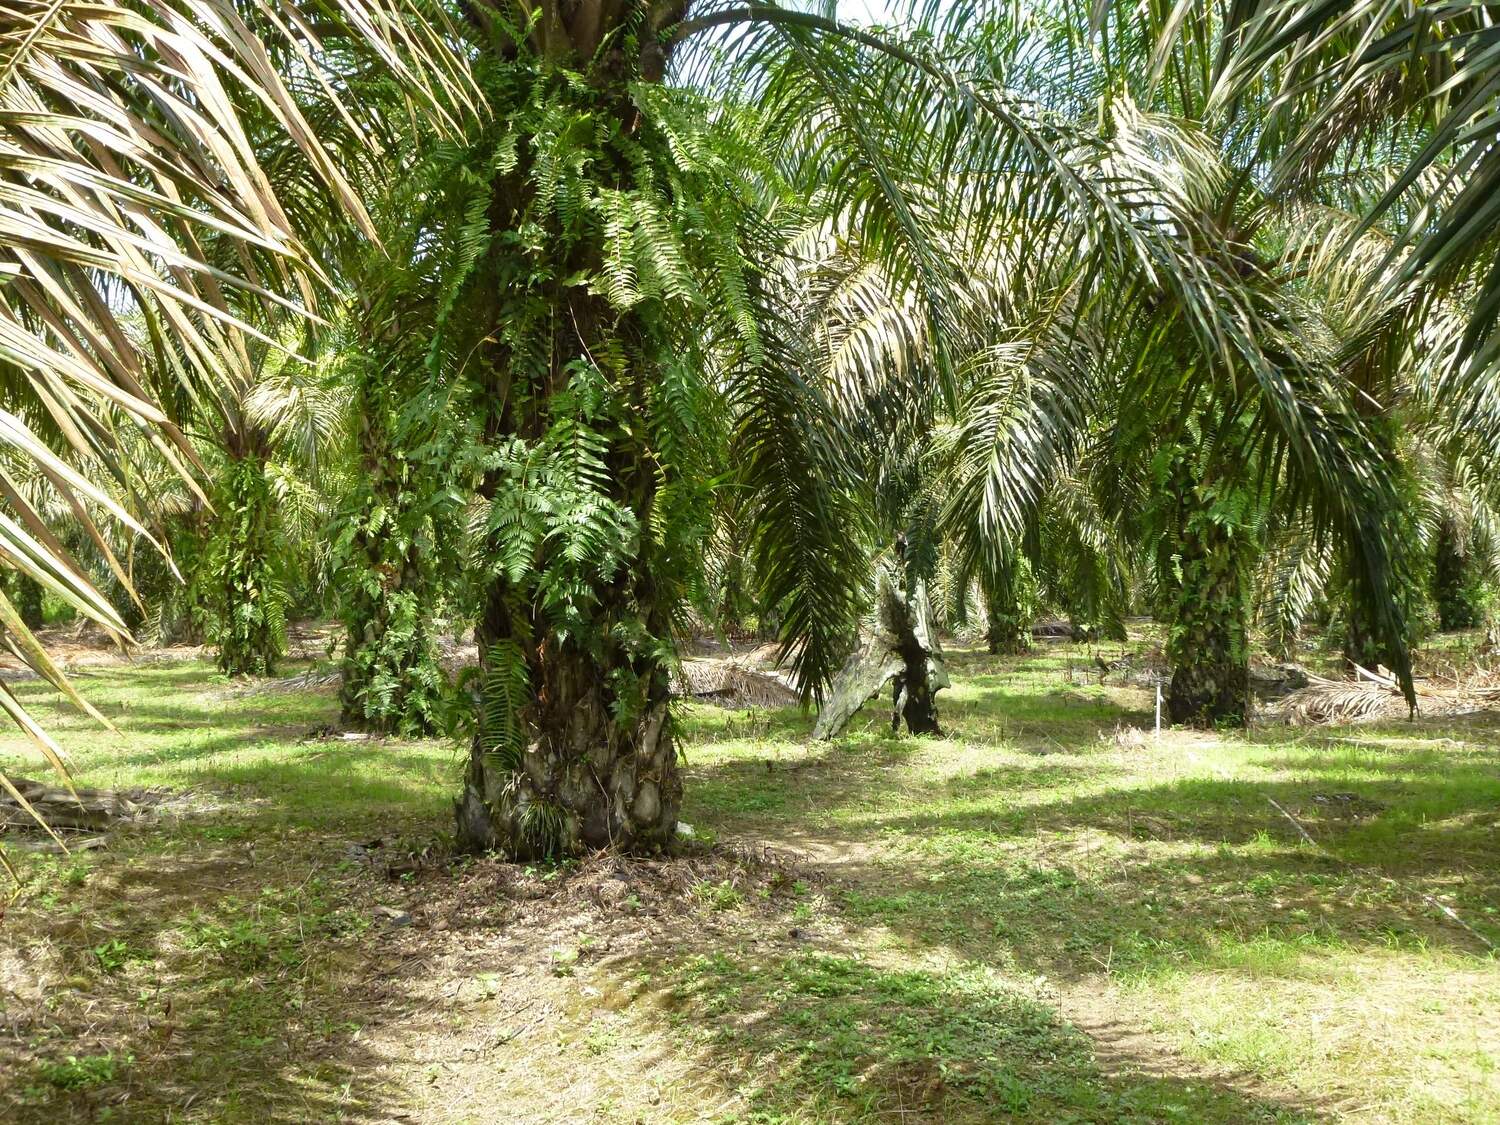 The effects of plant litter removal were not observed in oil palm plantations, where litter is very scarce in any case